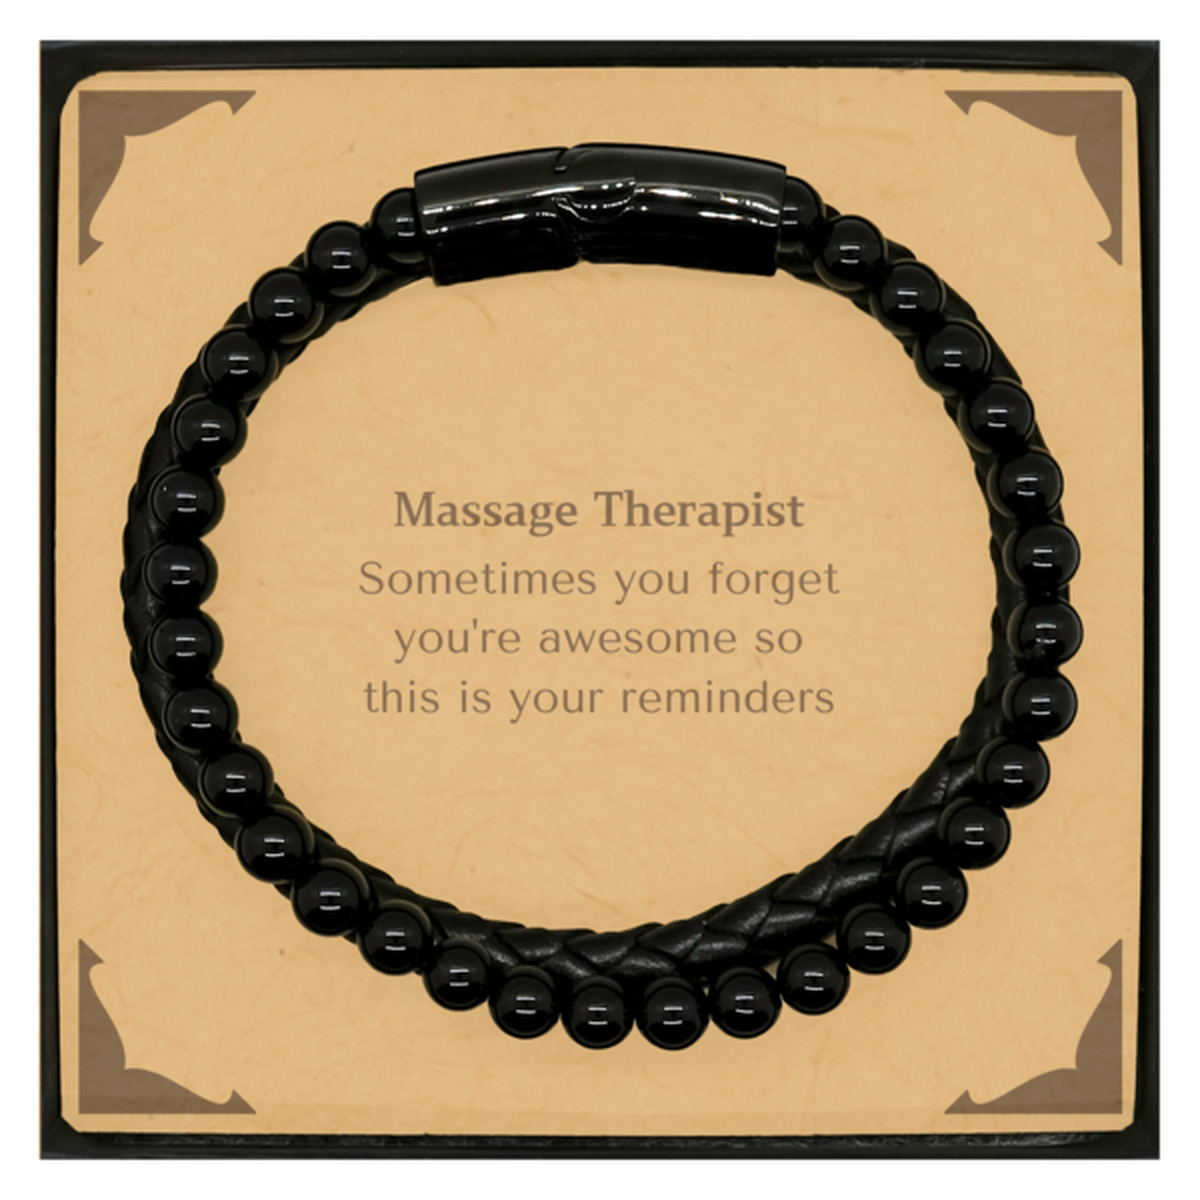 Sentimental Massage Therapist Stone Leather Bracelets, Massage Therapist Sometimes you forget you're awesome so this is your reminders, Graduation Christmas Birthday Gifts for Massage Therapist, Men, Women, Coworkers